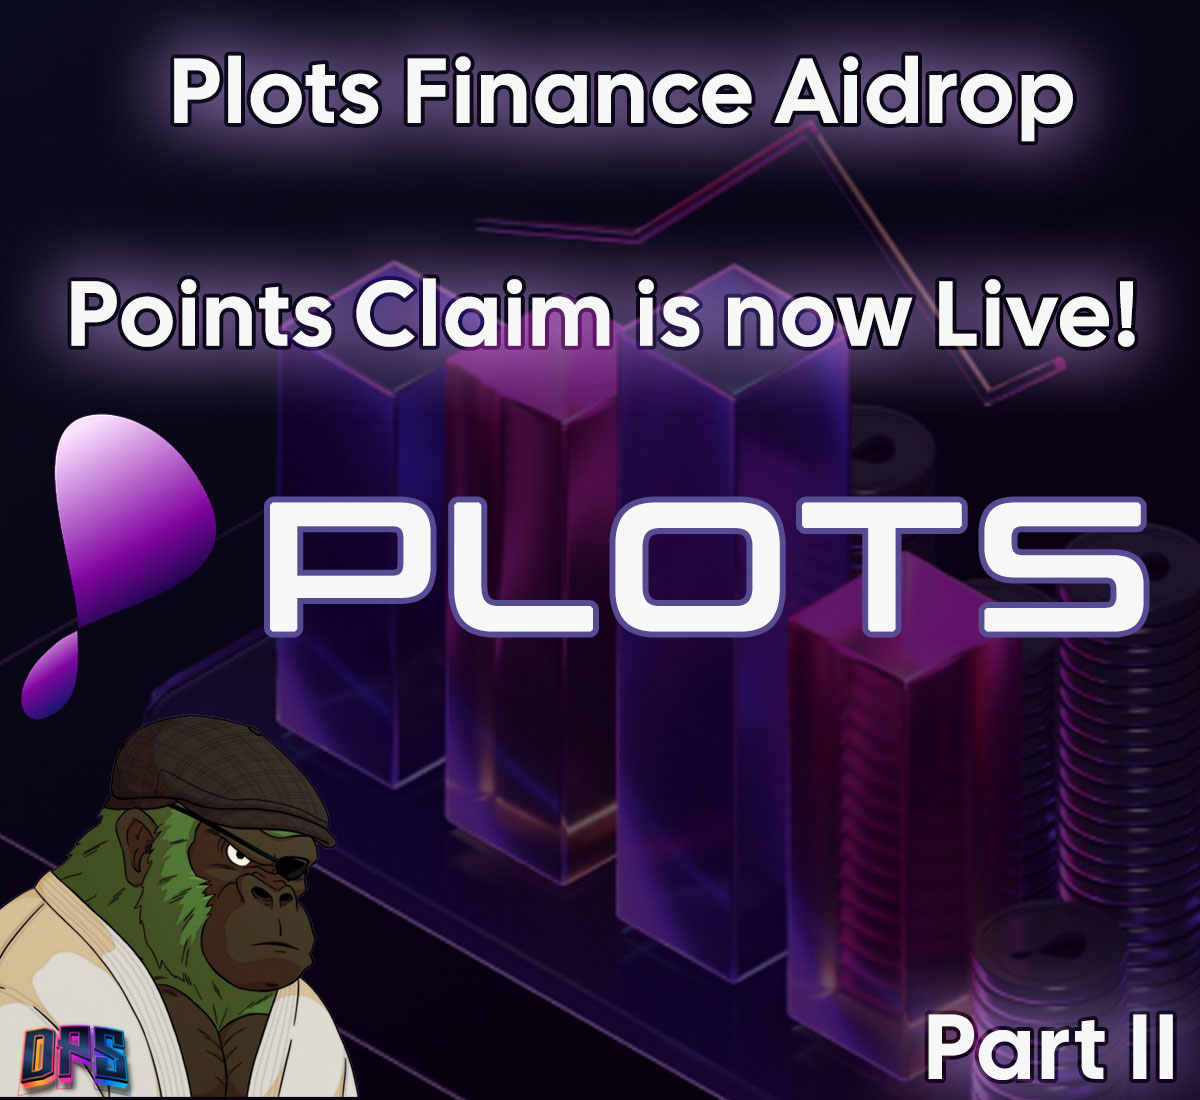 🌠 A stellar moment! Plots Finance $PLOTS Airdrop is here!

🚀airdrop.piots.finance
🎚 Connect Wallet
🎁 Pick up your tokens!
🌌 Your chance to shine with @plotsfinance!

#PLOTS #weETH $PLOTS #PlotsFinance $eth #layer2 #airdrop #web3 #token #bnb📷 #newairdrop #l2 #eth…